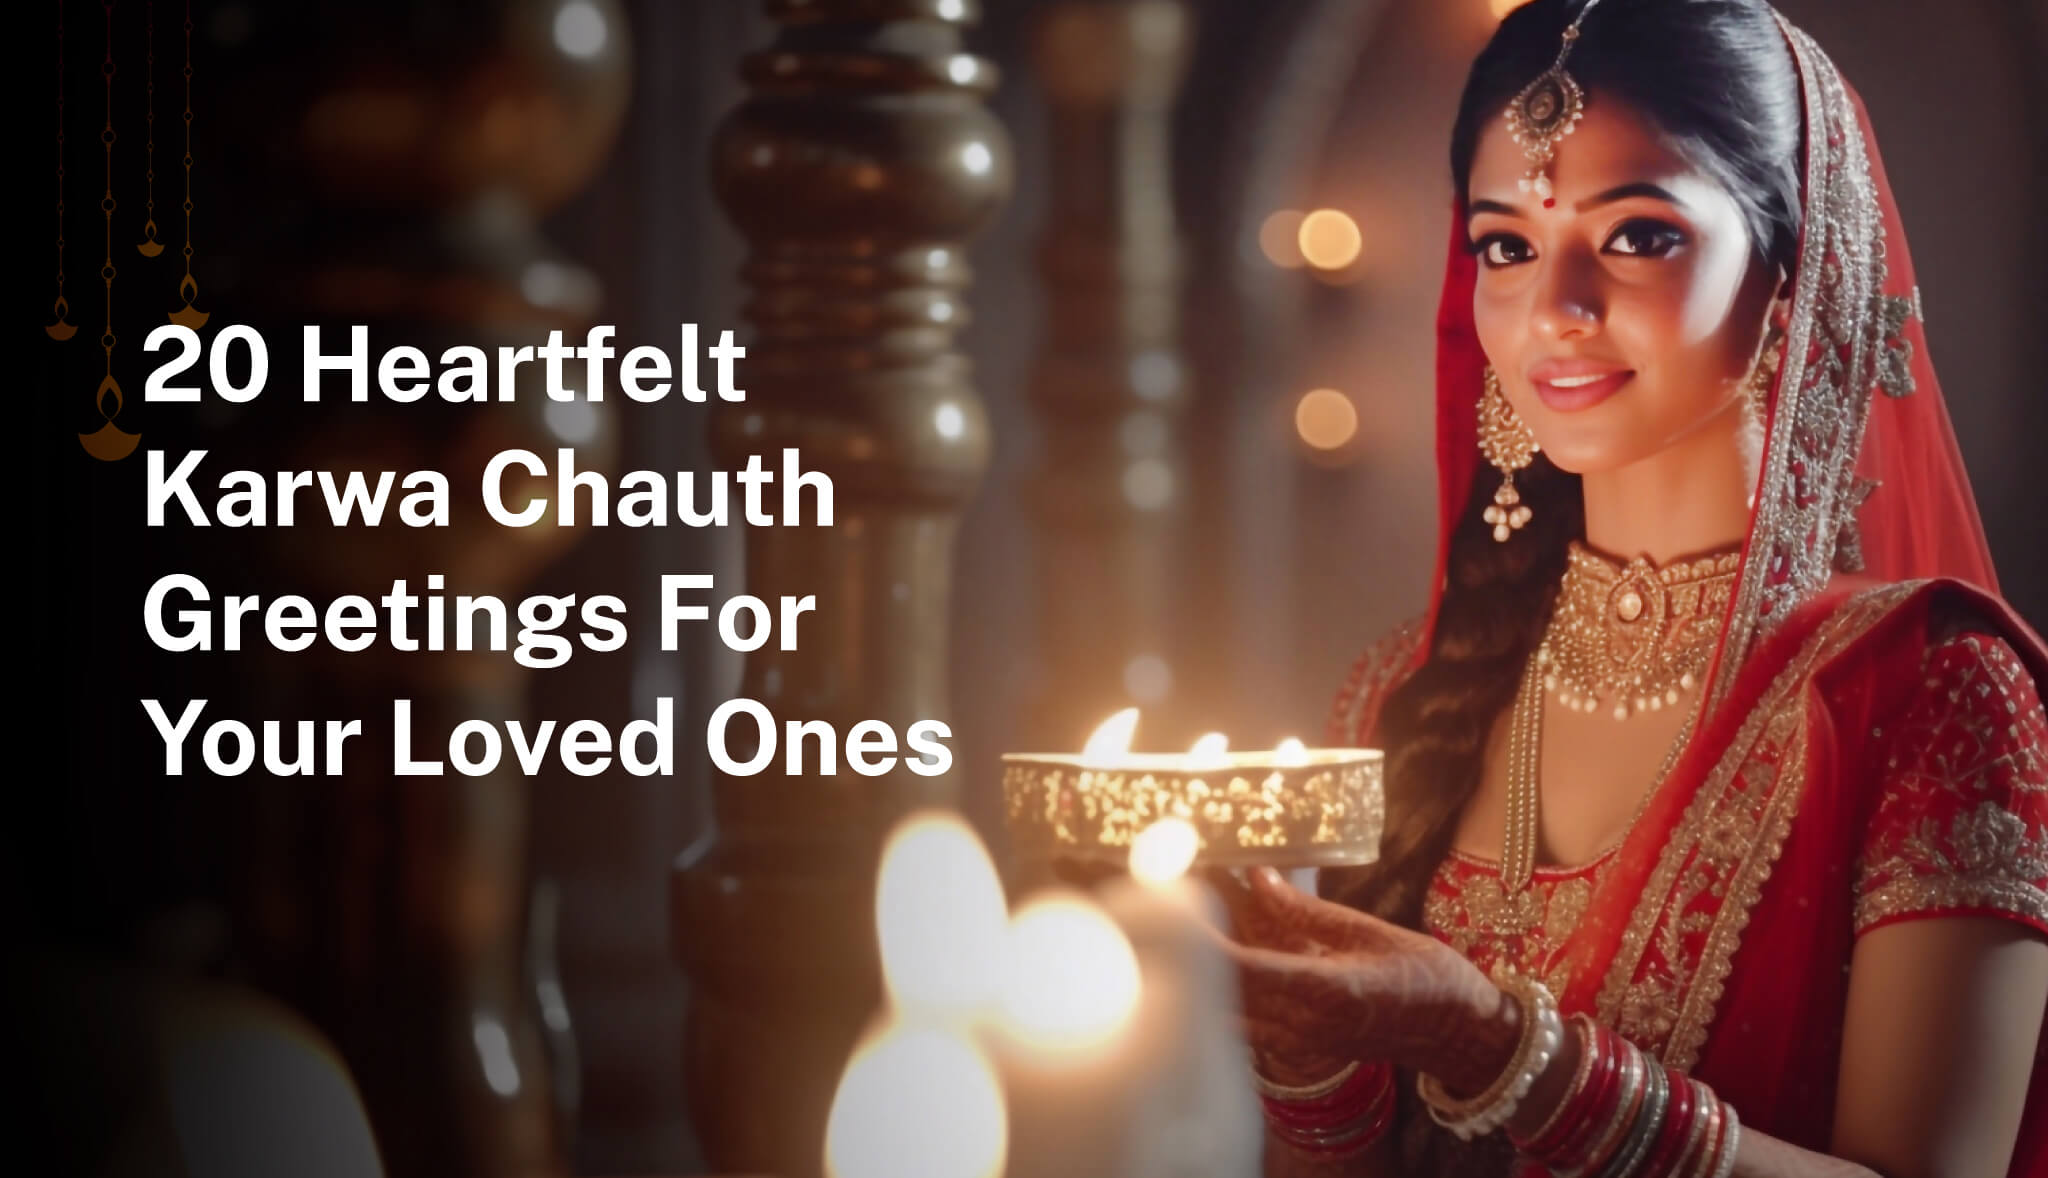 20 Heartfelt Karwa Chauth Greetings to Express Your Love - Post it